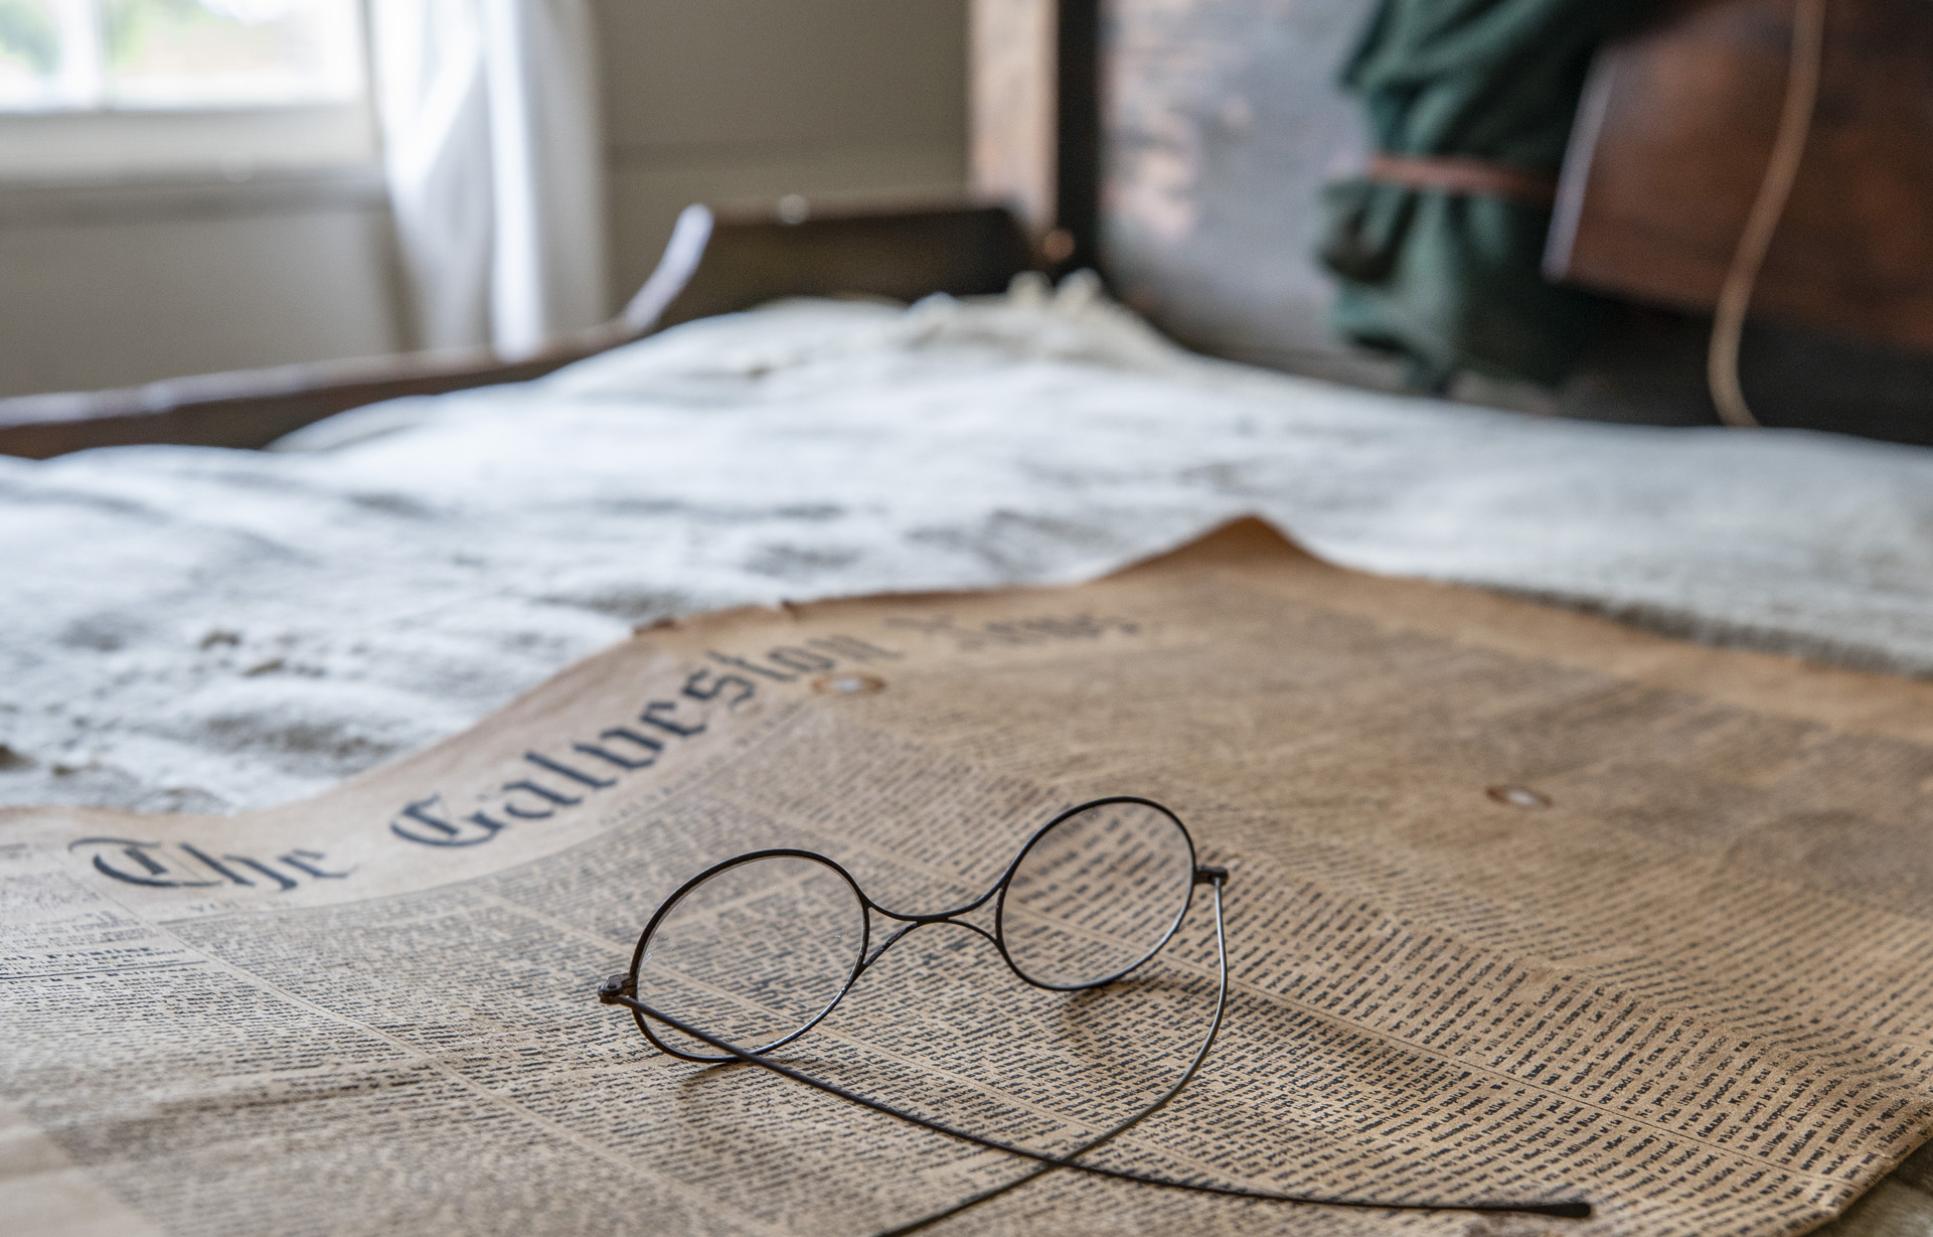 Newspaper laying on a bed with glasses on top